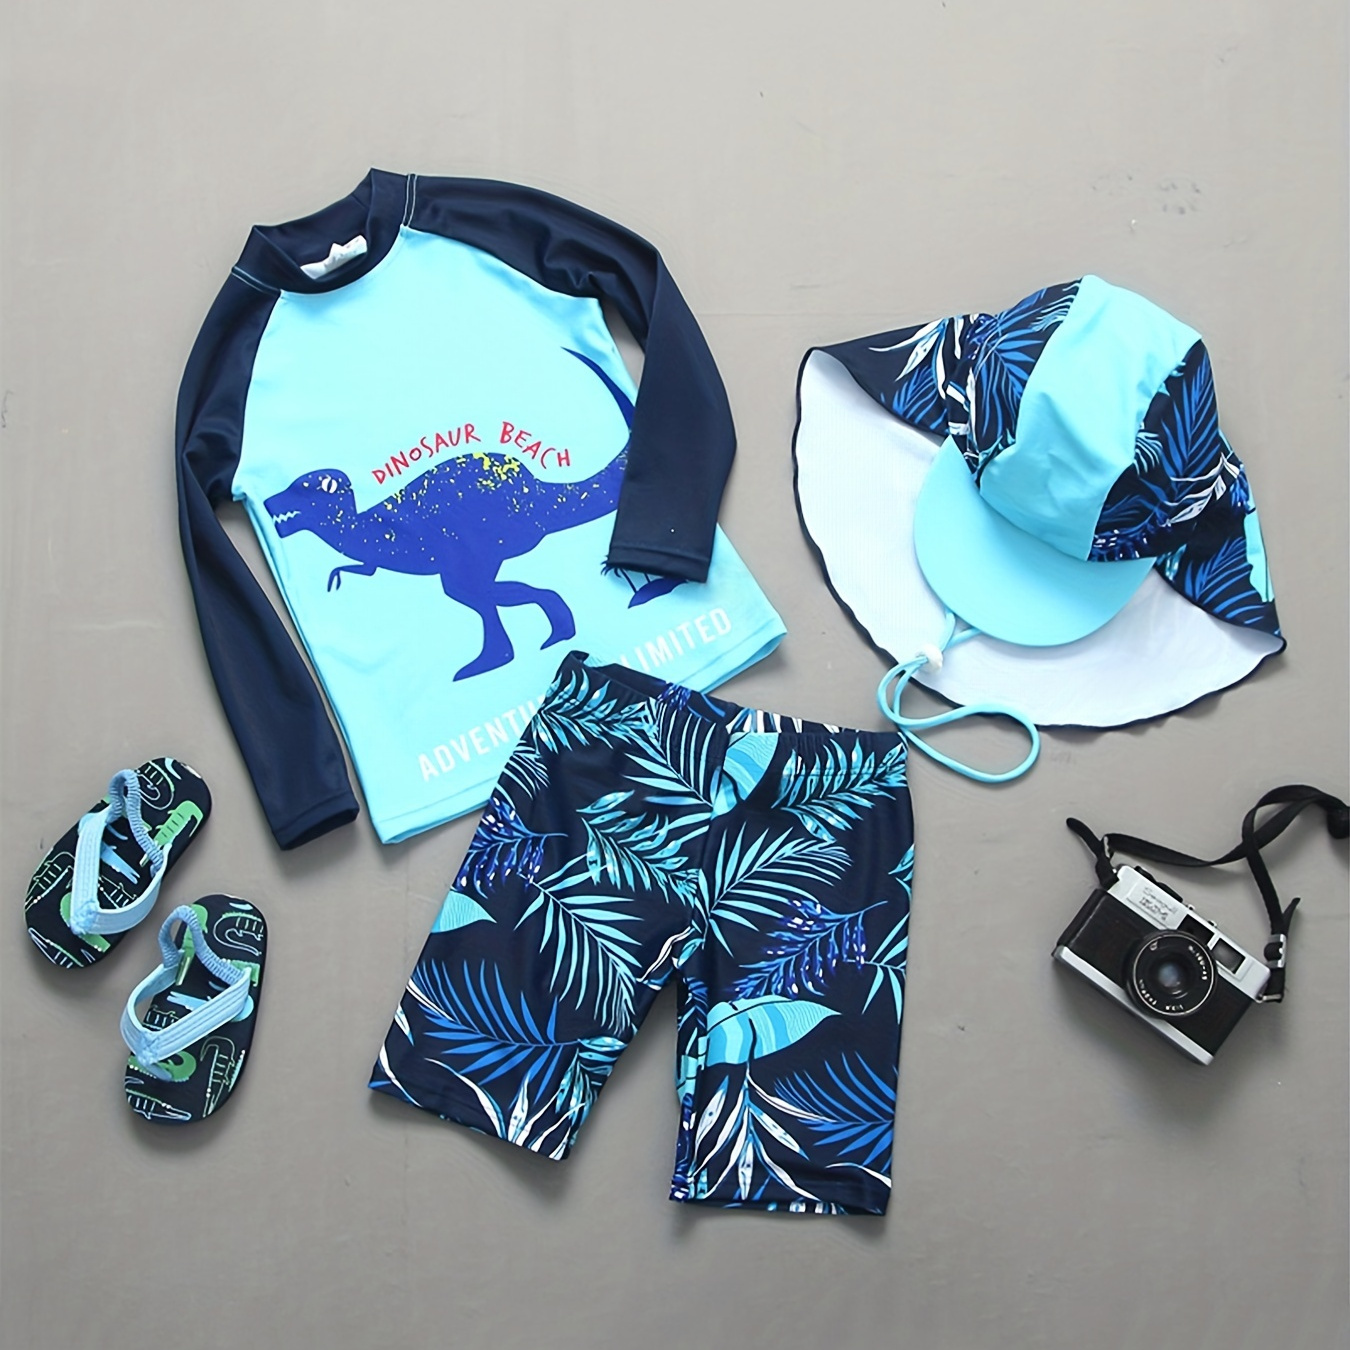 

3pcs Boys "dinosaur Beach" Leaf Print Swimming Suit Swimming Trunks & Tops & For Beach Vacation Kids Clothes Sets